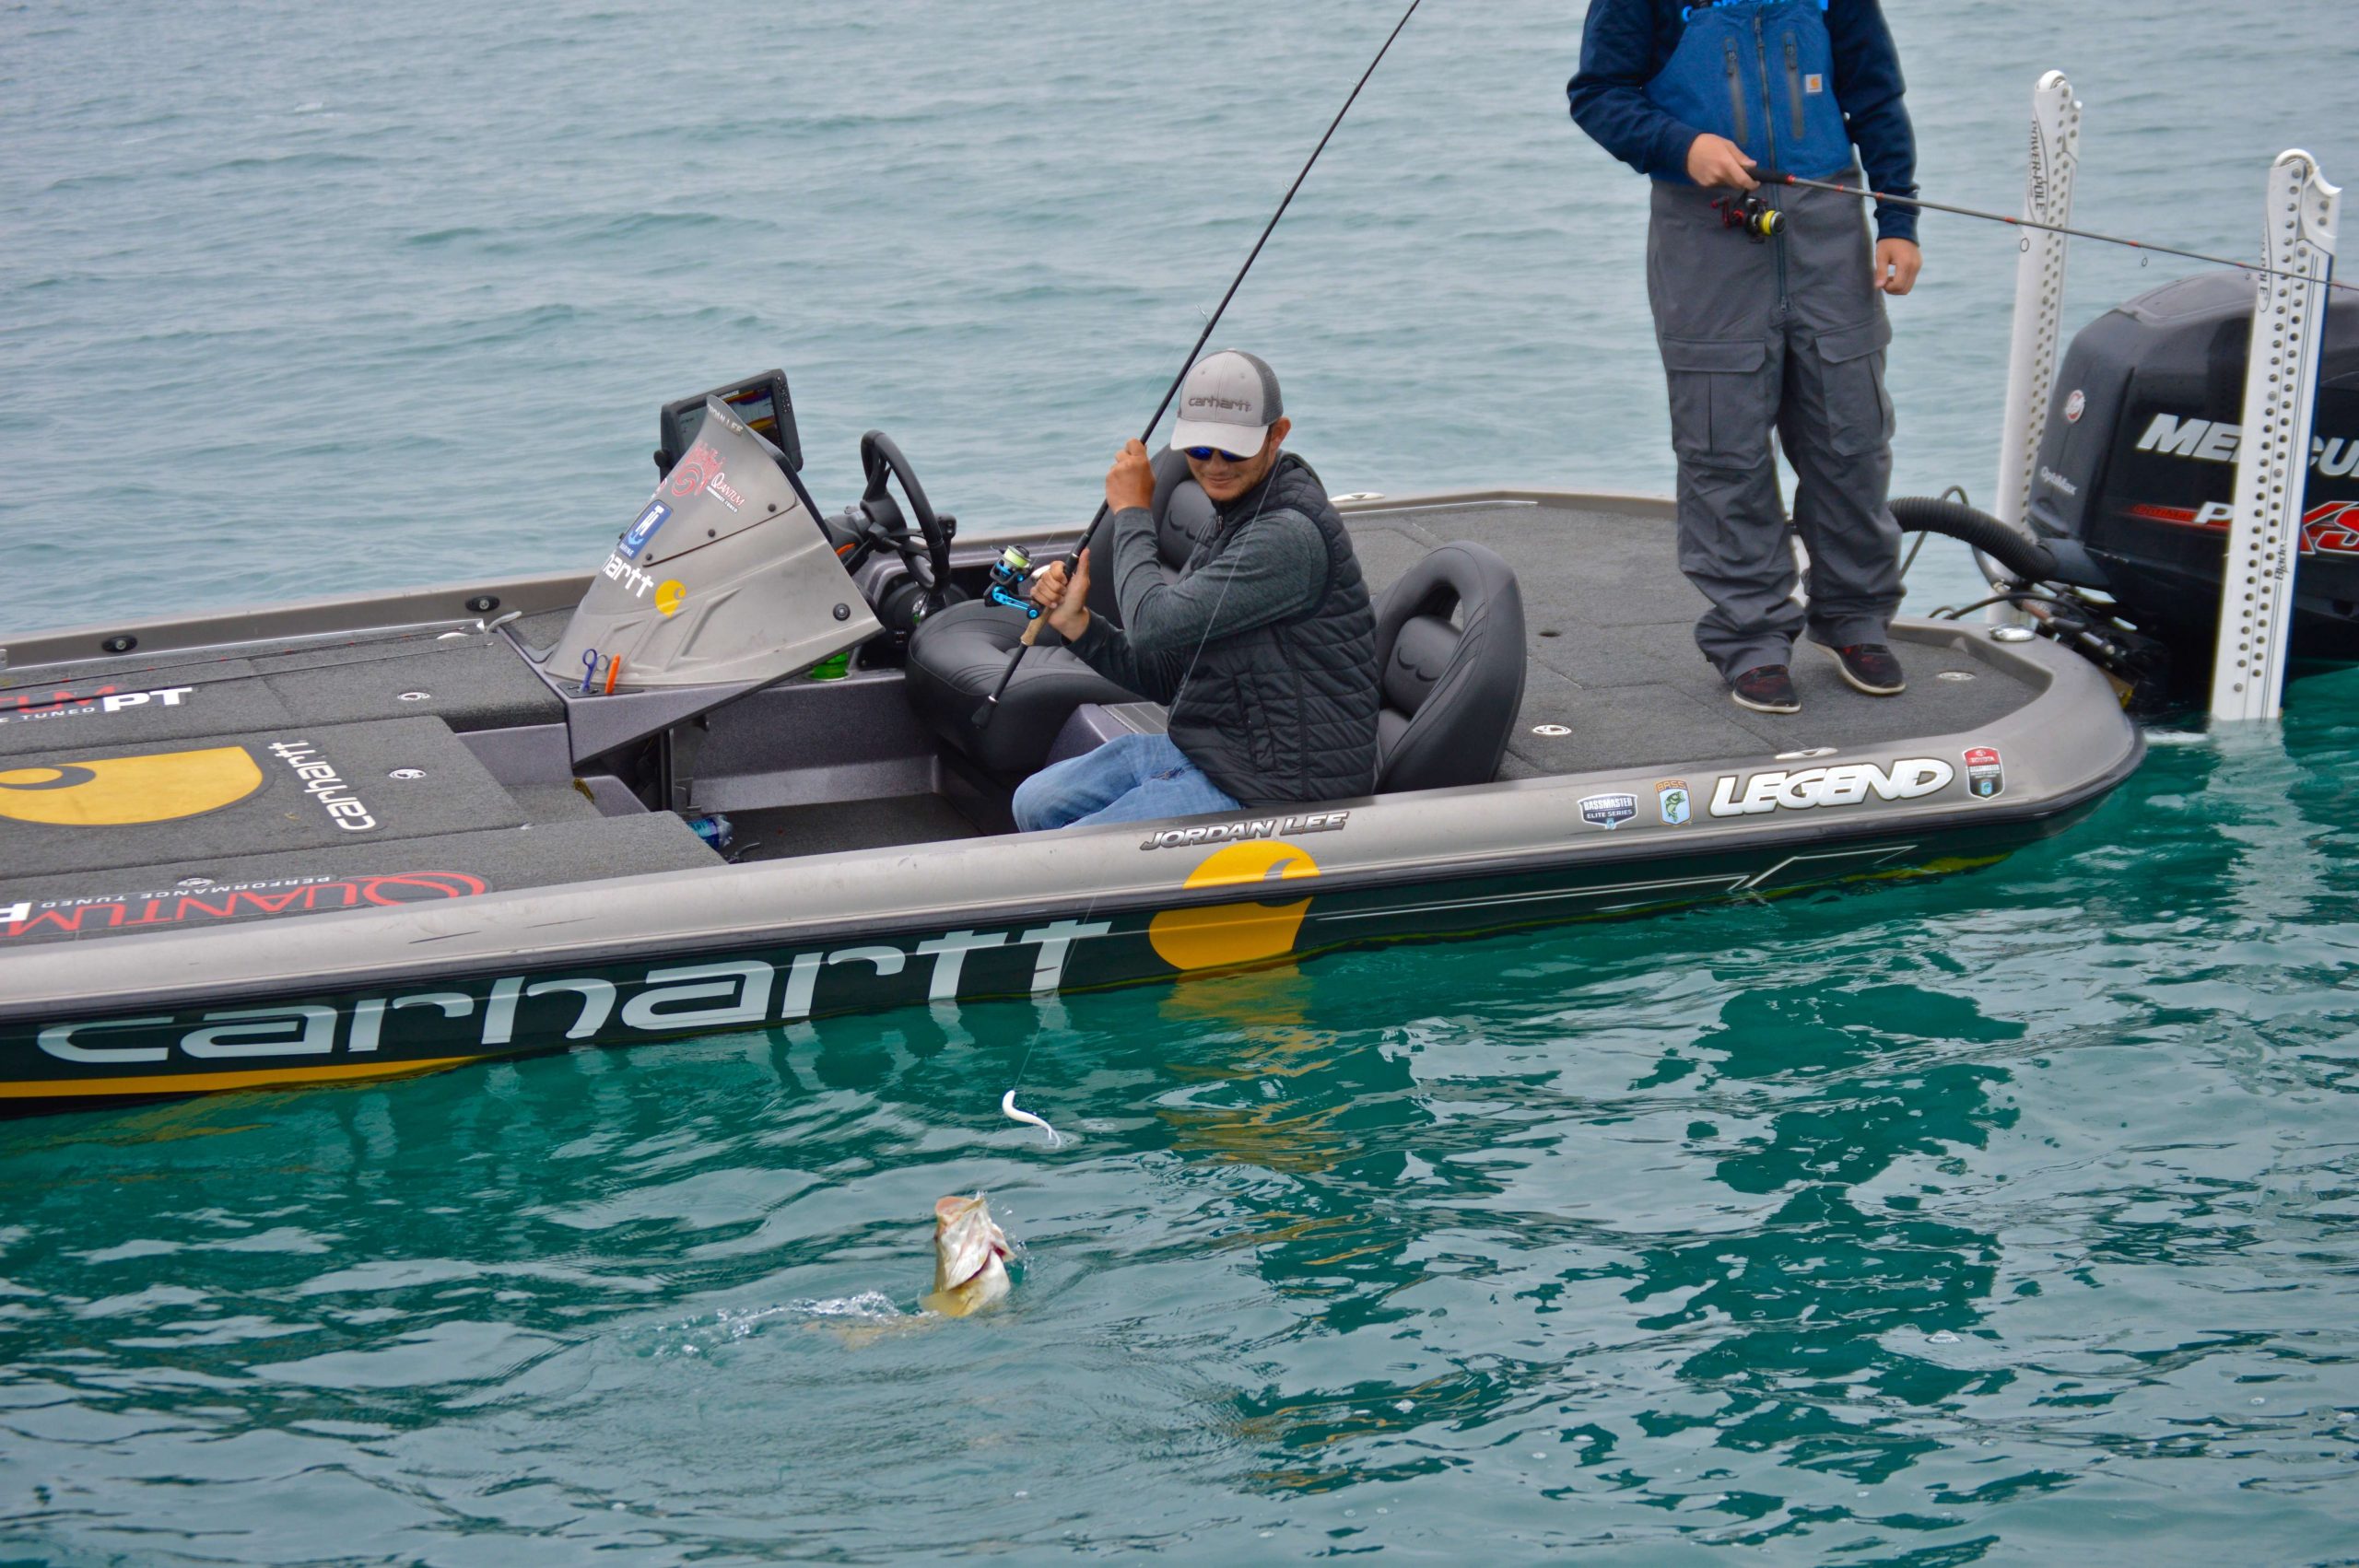 Carhartt winner fishes with Lee brothers - Bassmaster